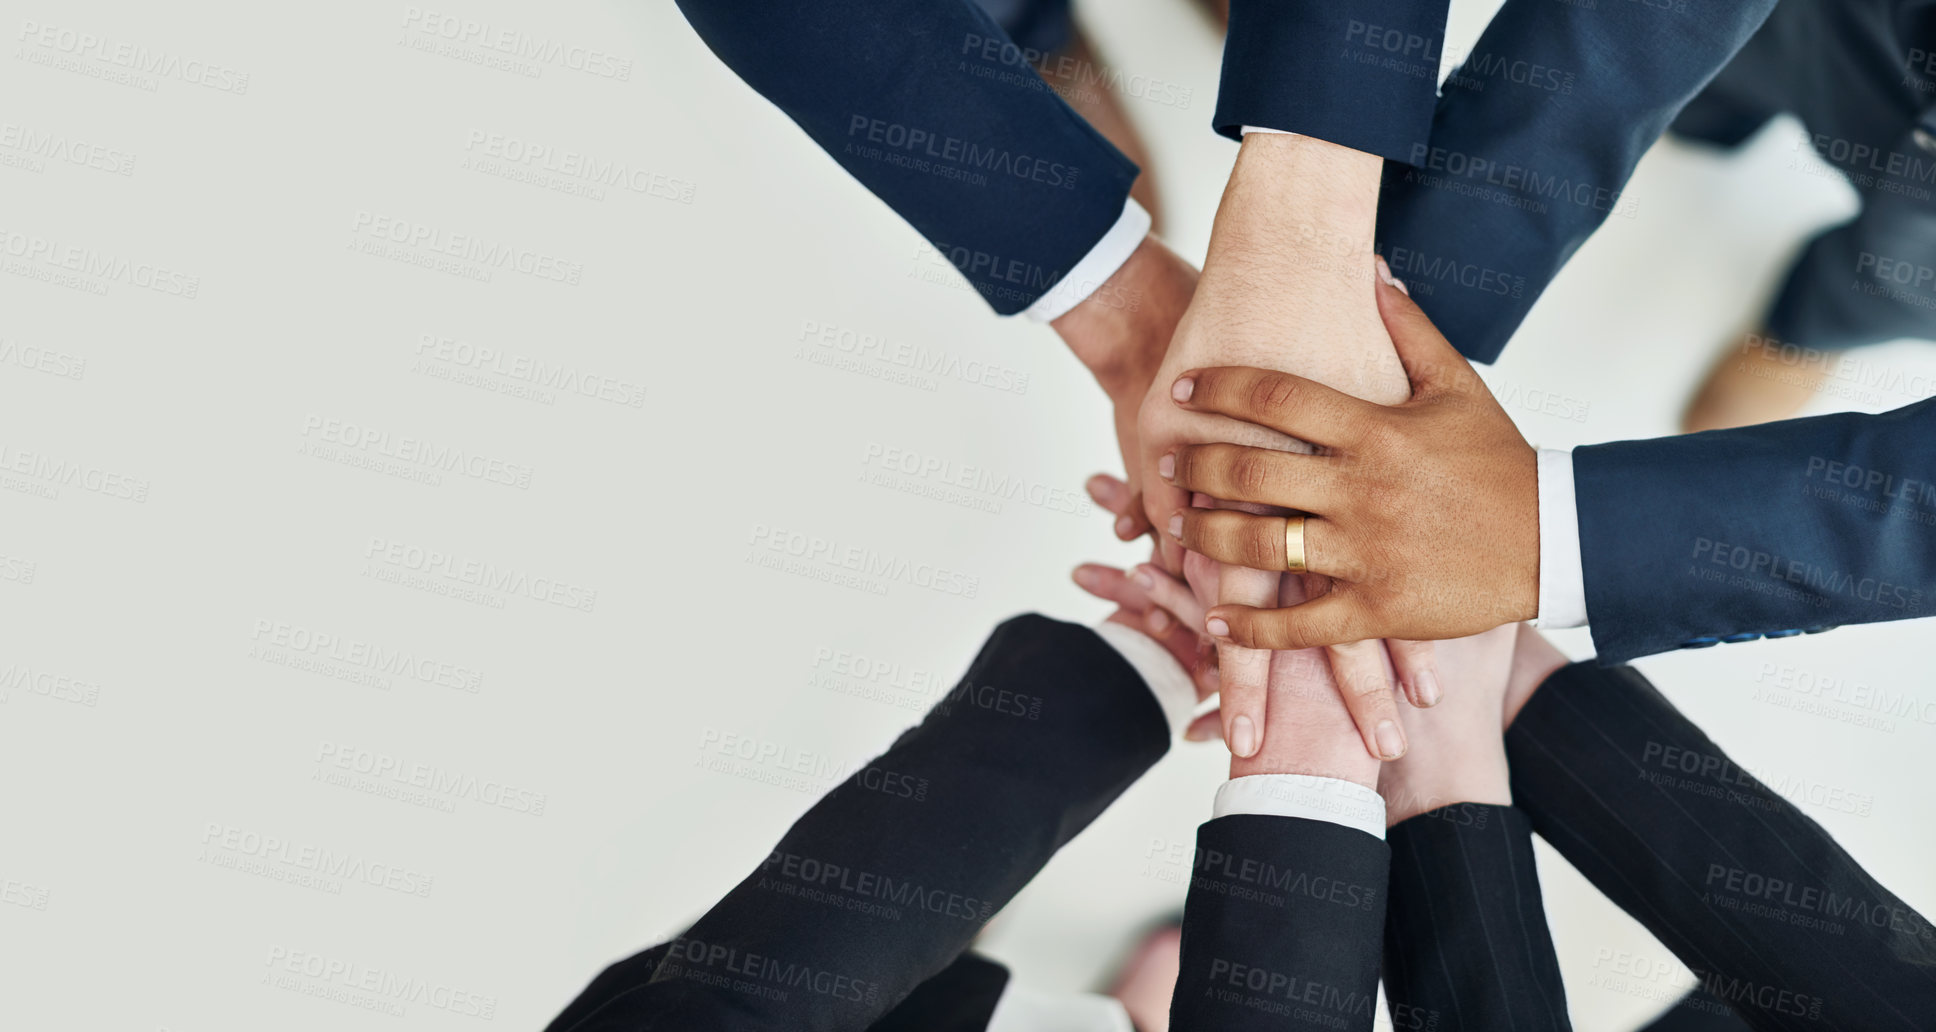 Buy stock photo High angle shot of a group of unrecognizable businesspeople standing in a huddle with their hands stacked together